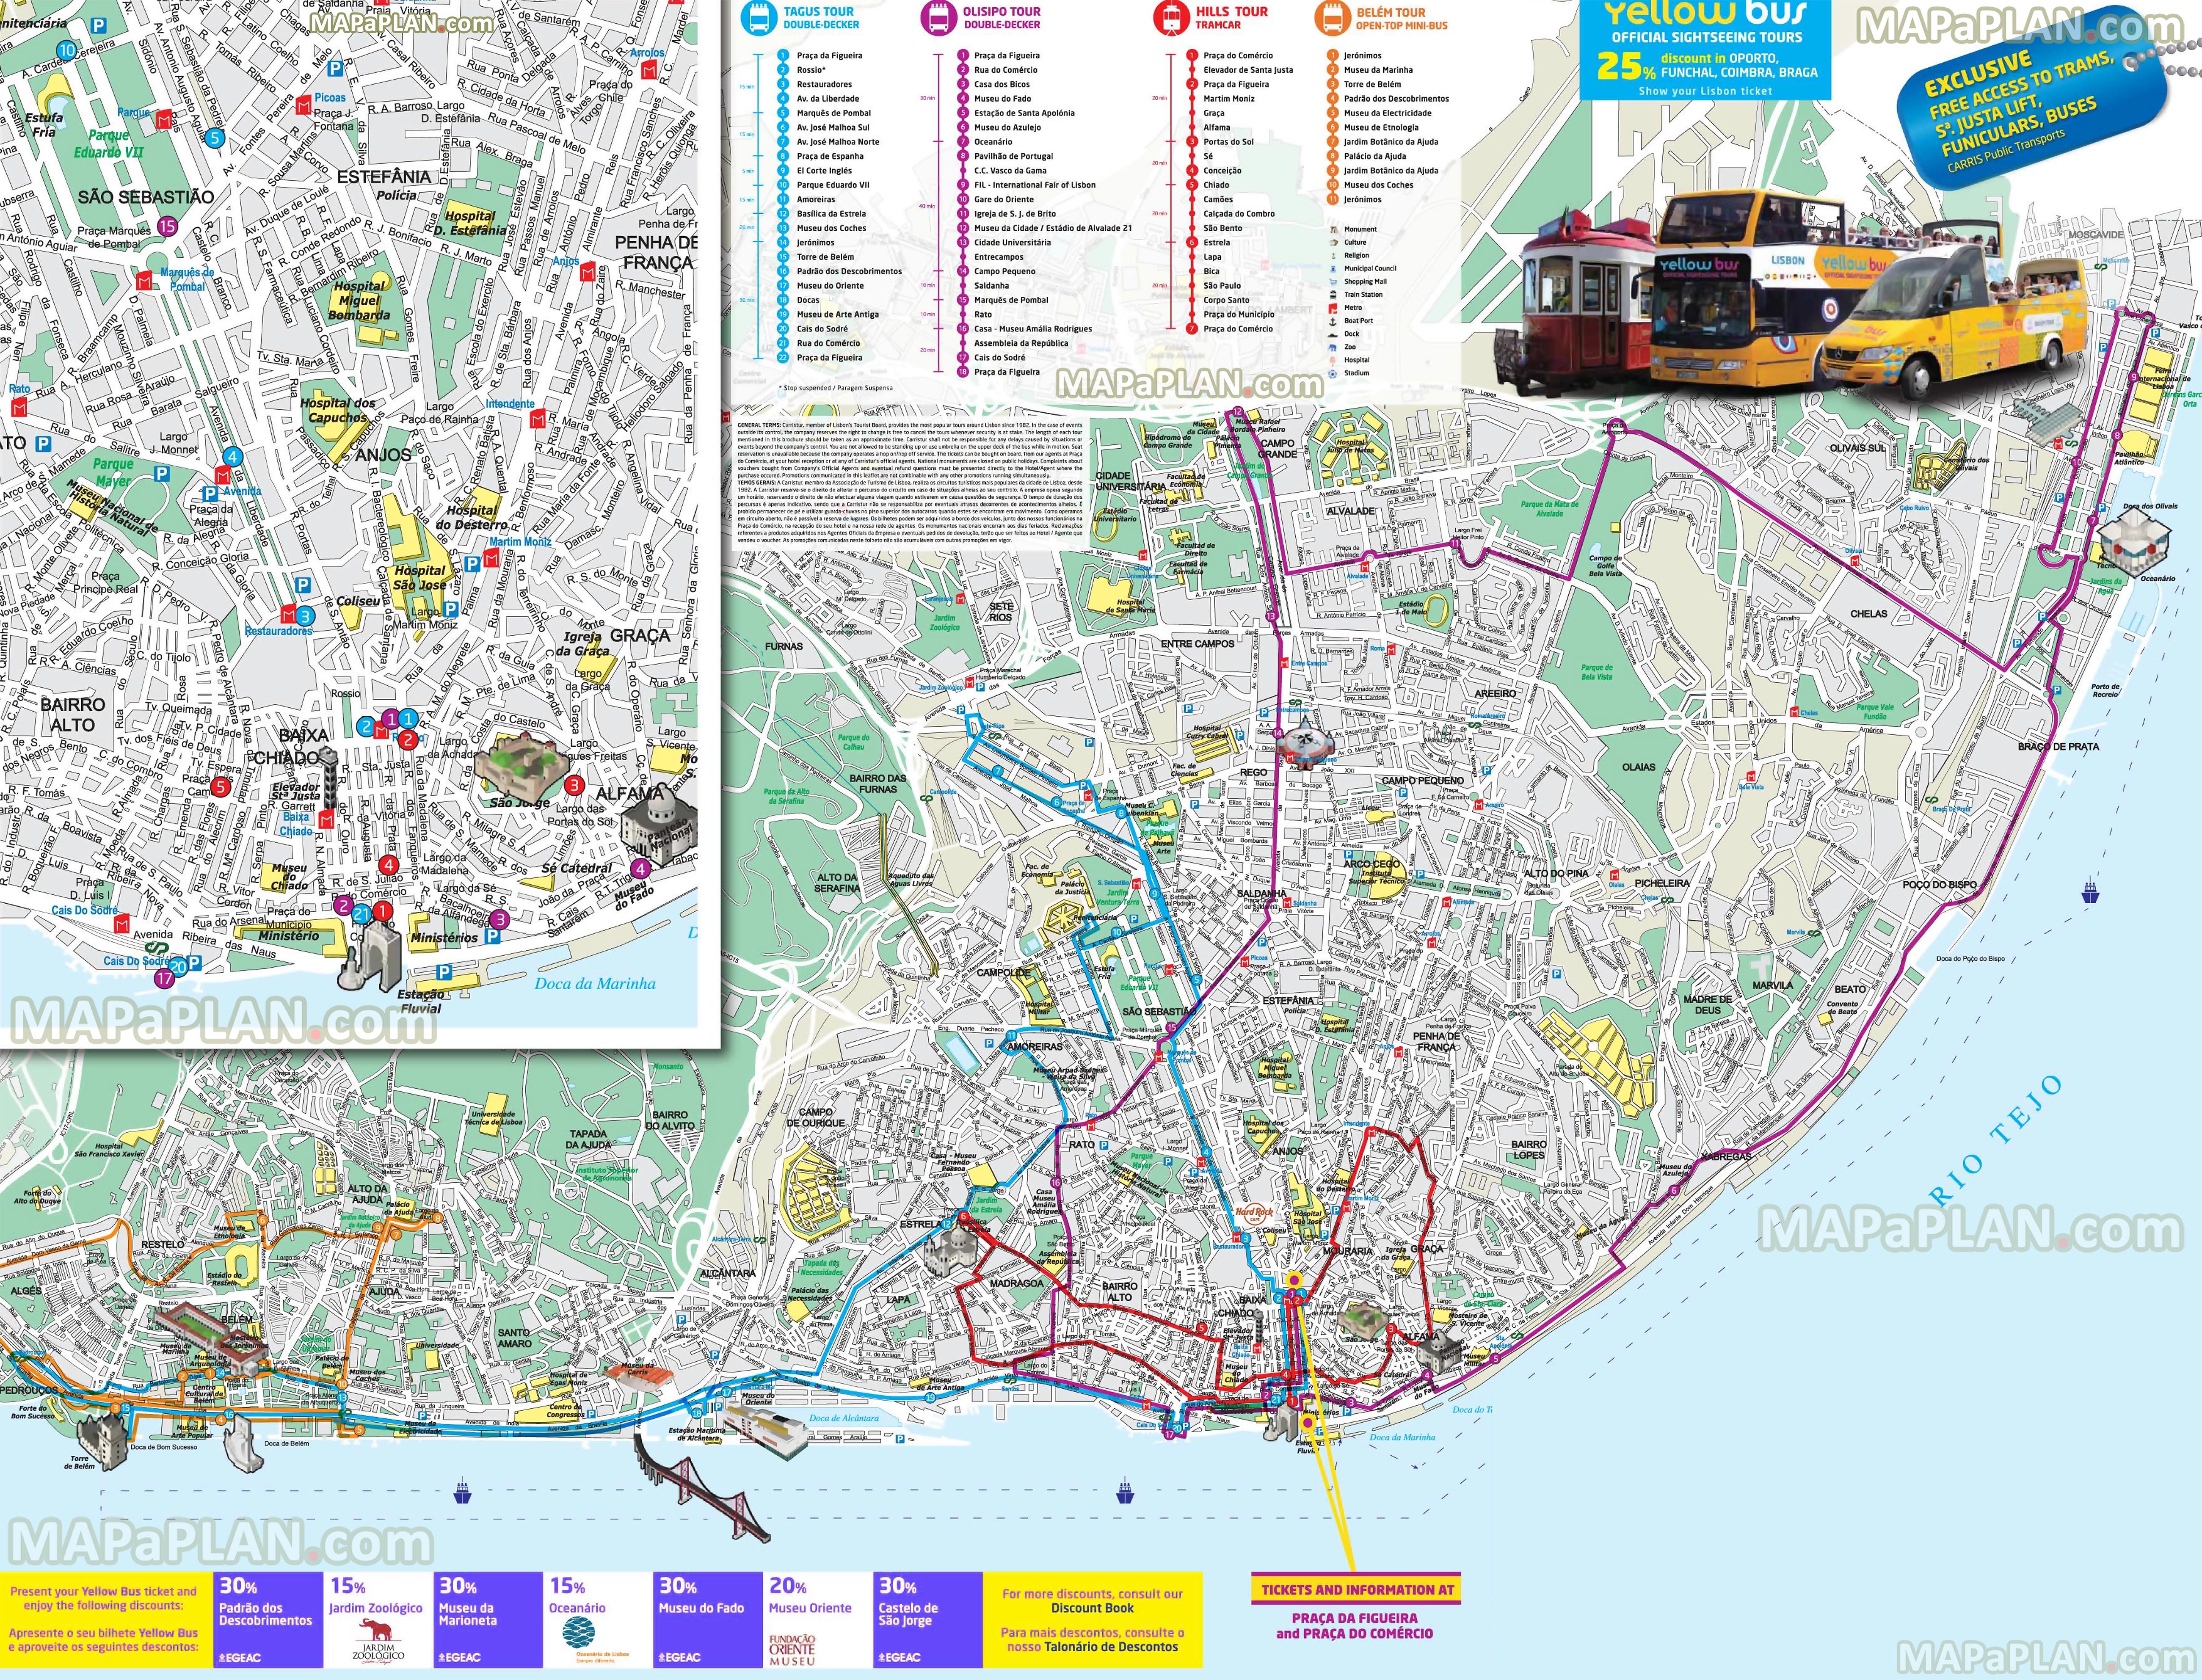 yellow bus hills tour 3d planner popular central surrounding spots things do what see where go fado museum coast Lisbon top tourist attractions map